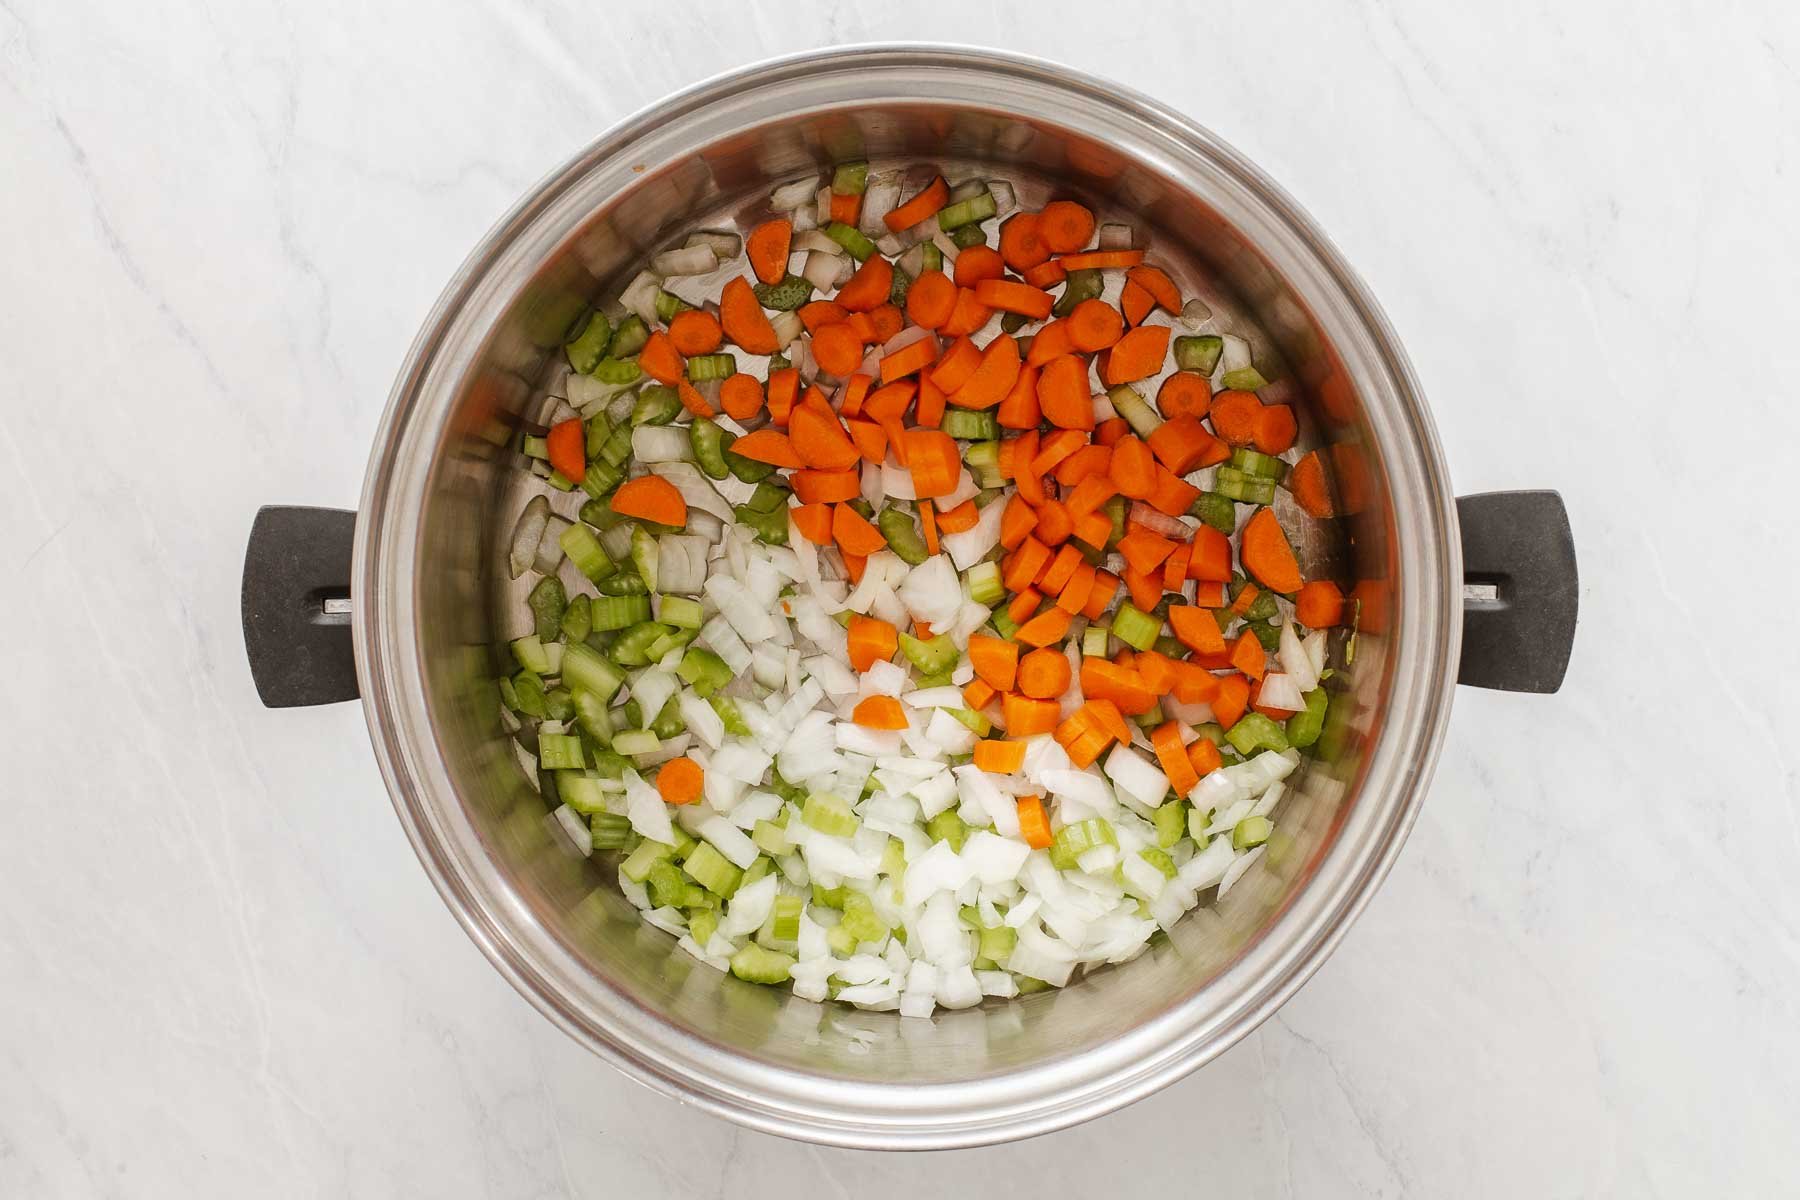 Diced carrot, celery and onion in a silver pot.